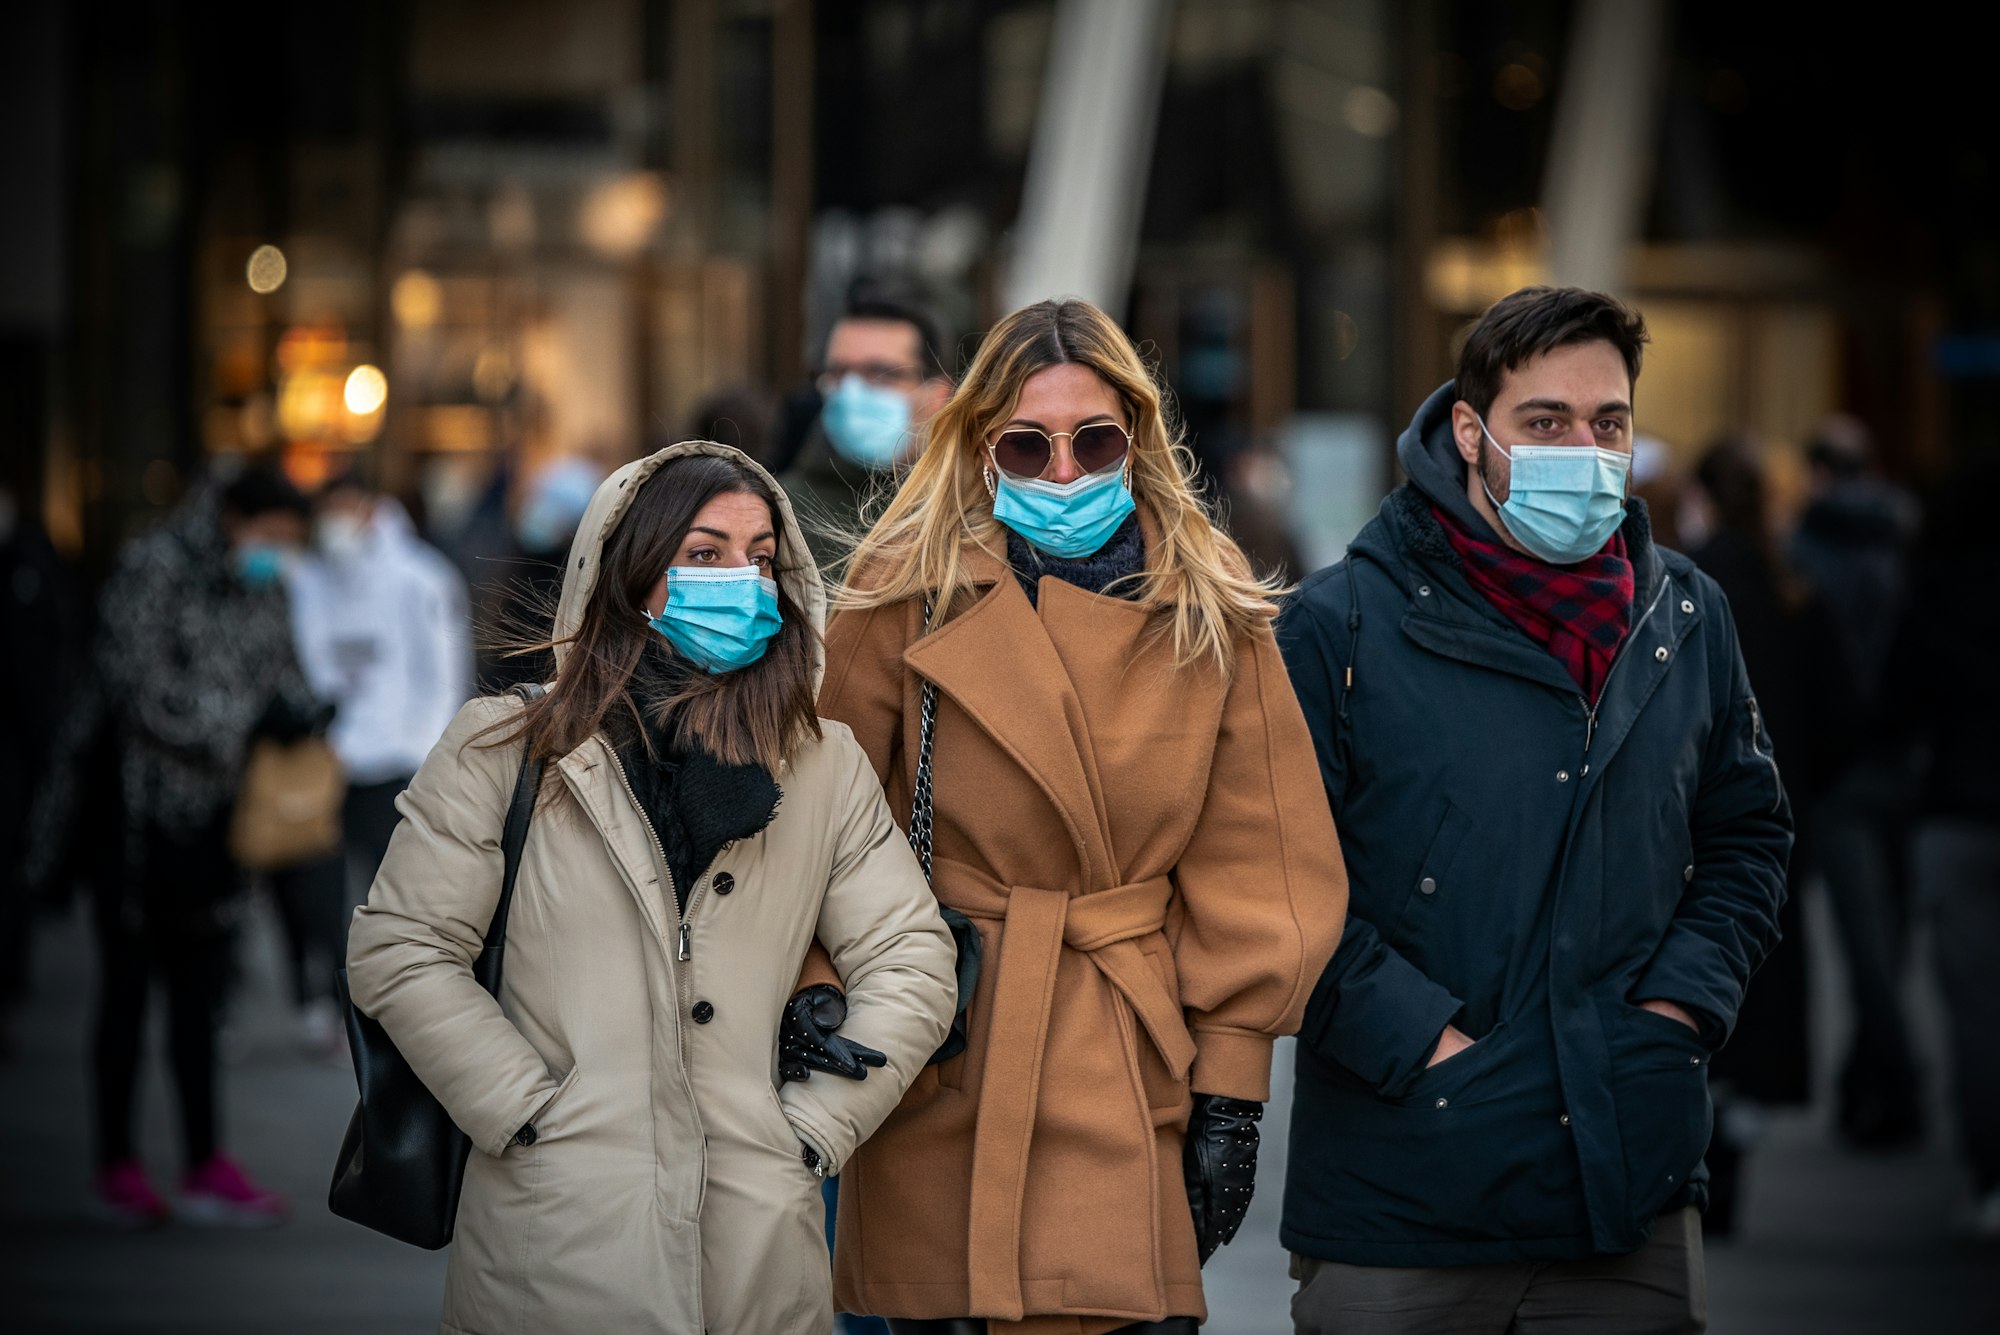 People out for a walk during the Covid 19 Pandemic in Milan